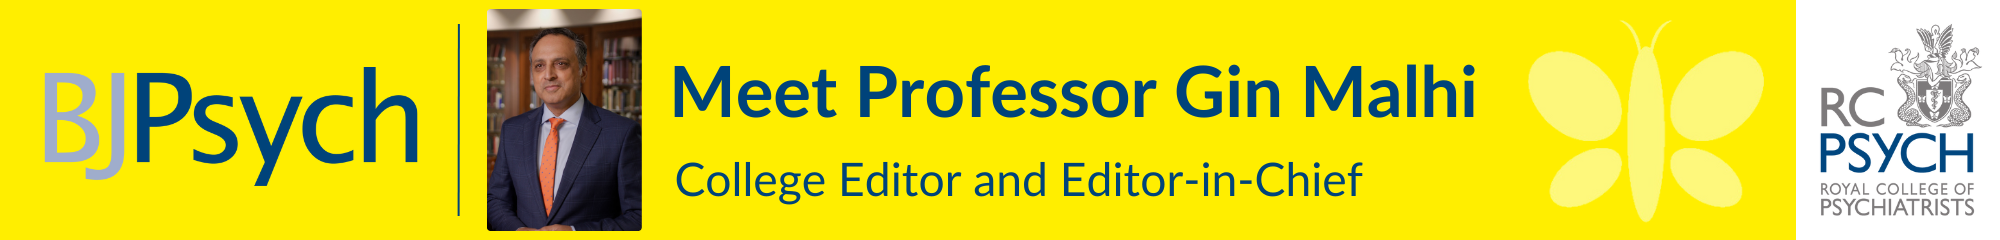 Meet the College Editor and Editor in Chief of the British Journal of Psychiatry, Professor Gin Malhi